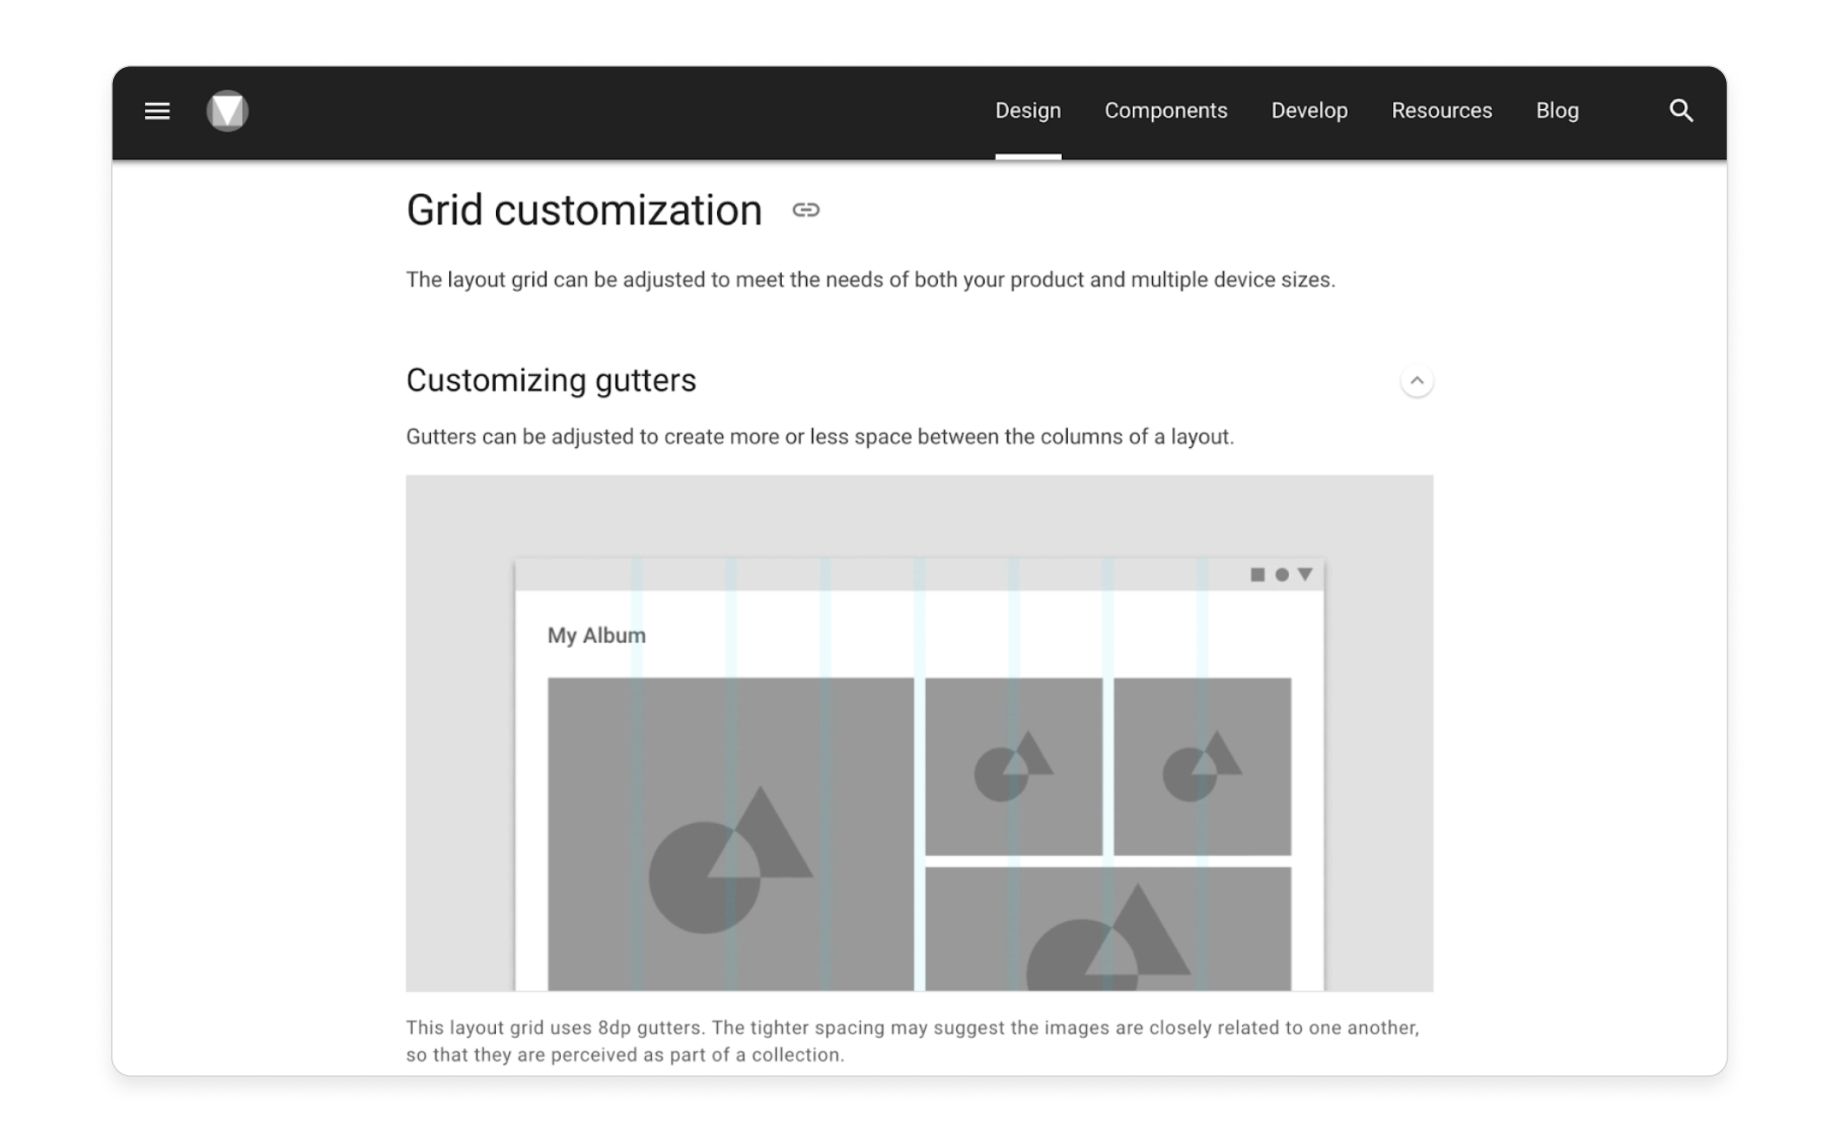 Material Design guidelines for creating responsive layout grids